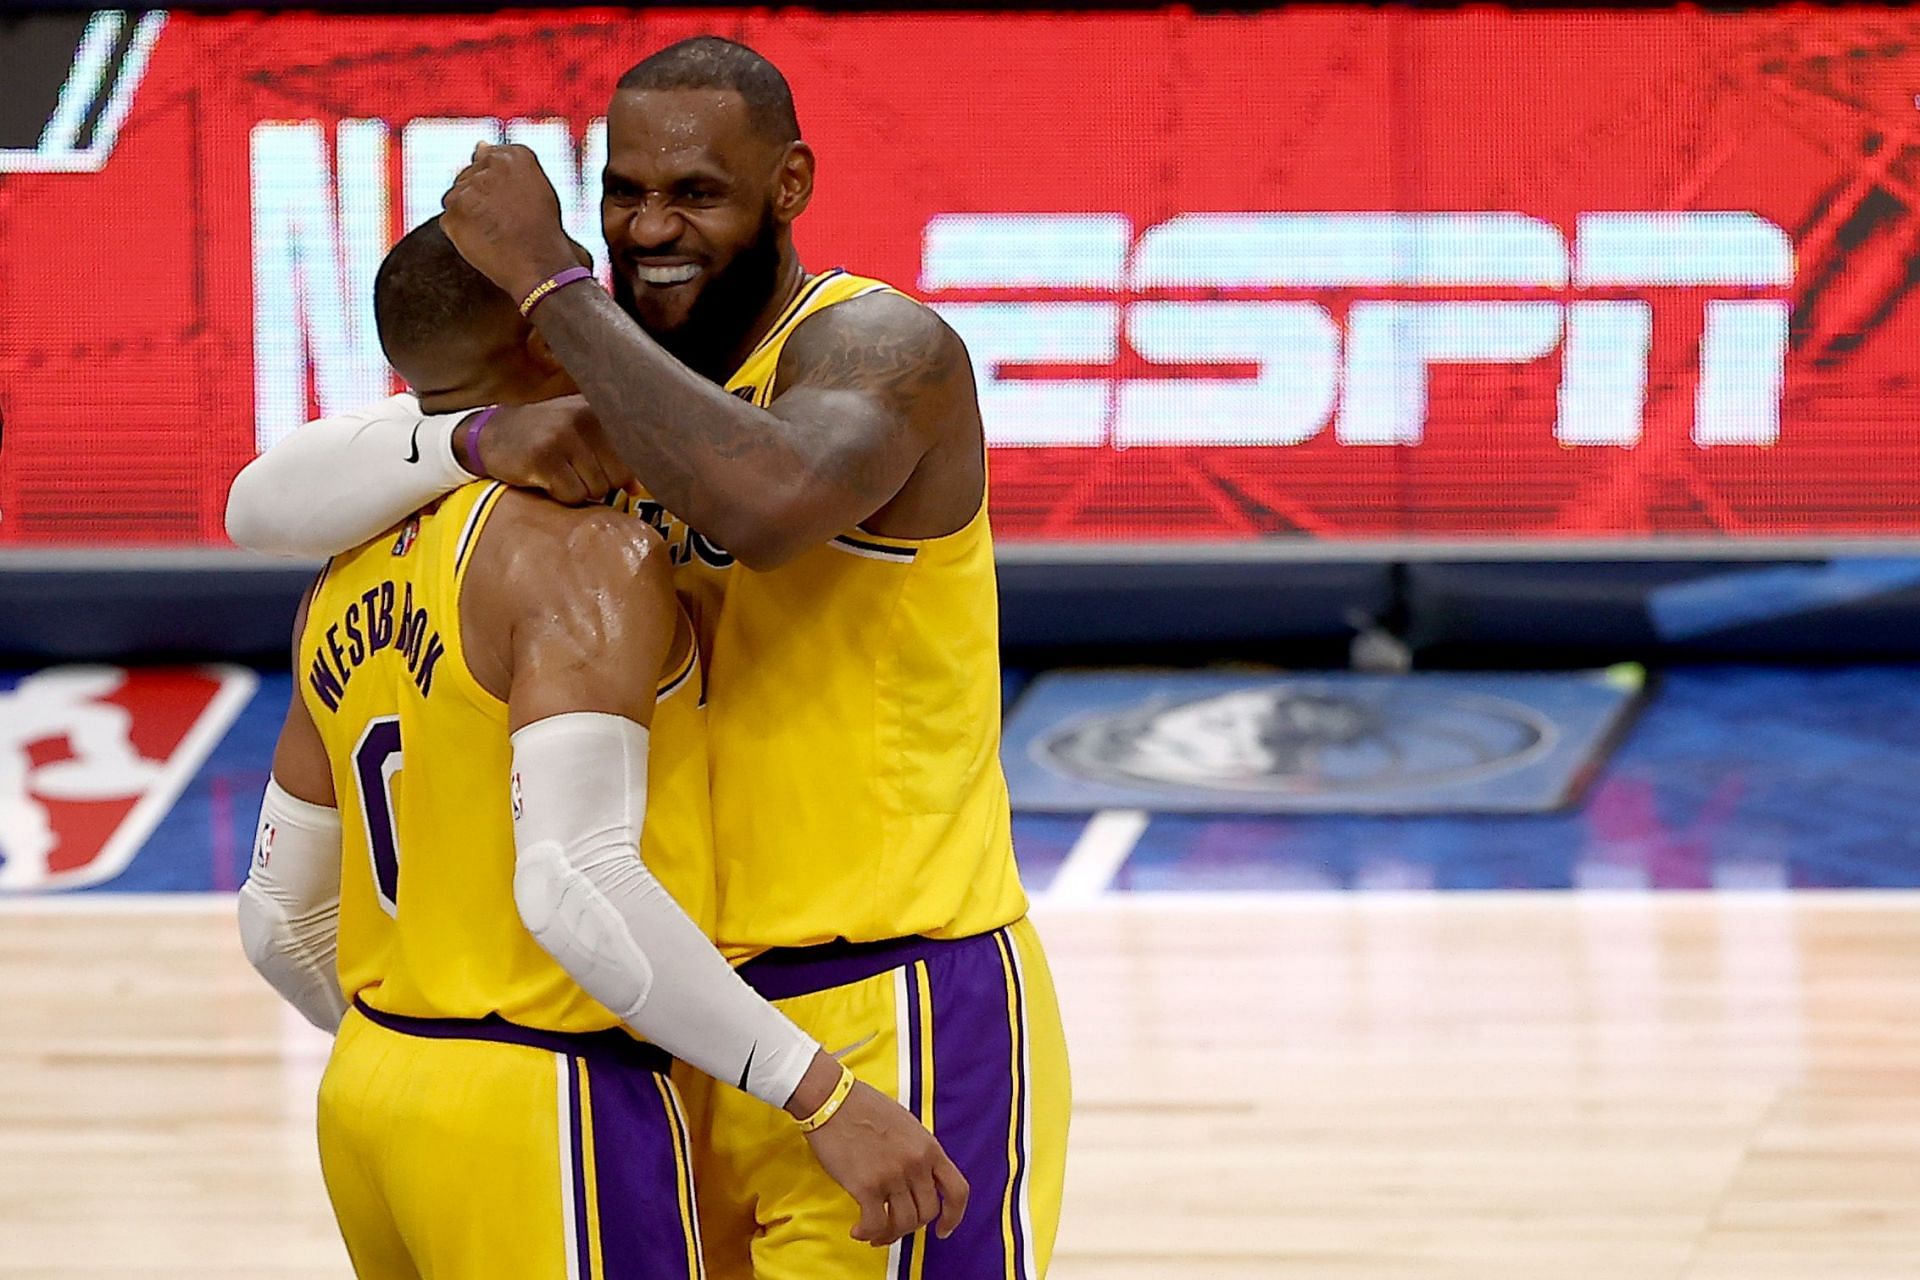 LeBron James and Russell Westbrook were a part of the LA Lakers&#039; victory against the New York Knicks